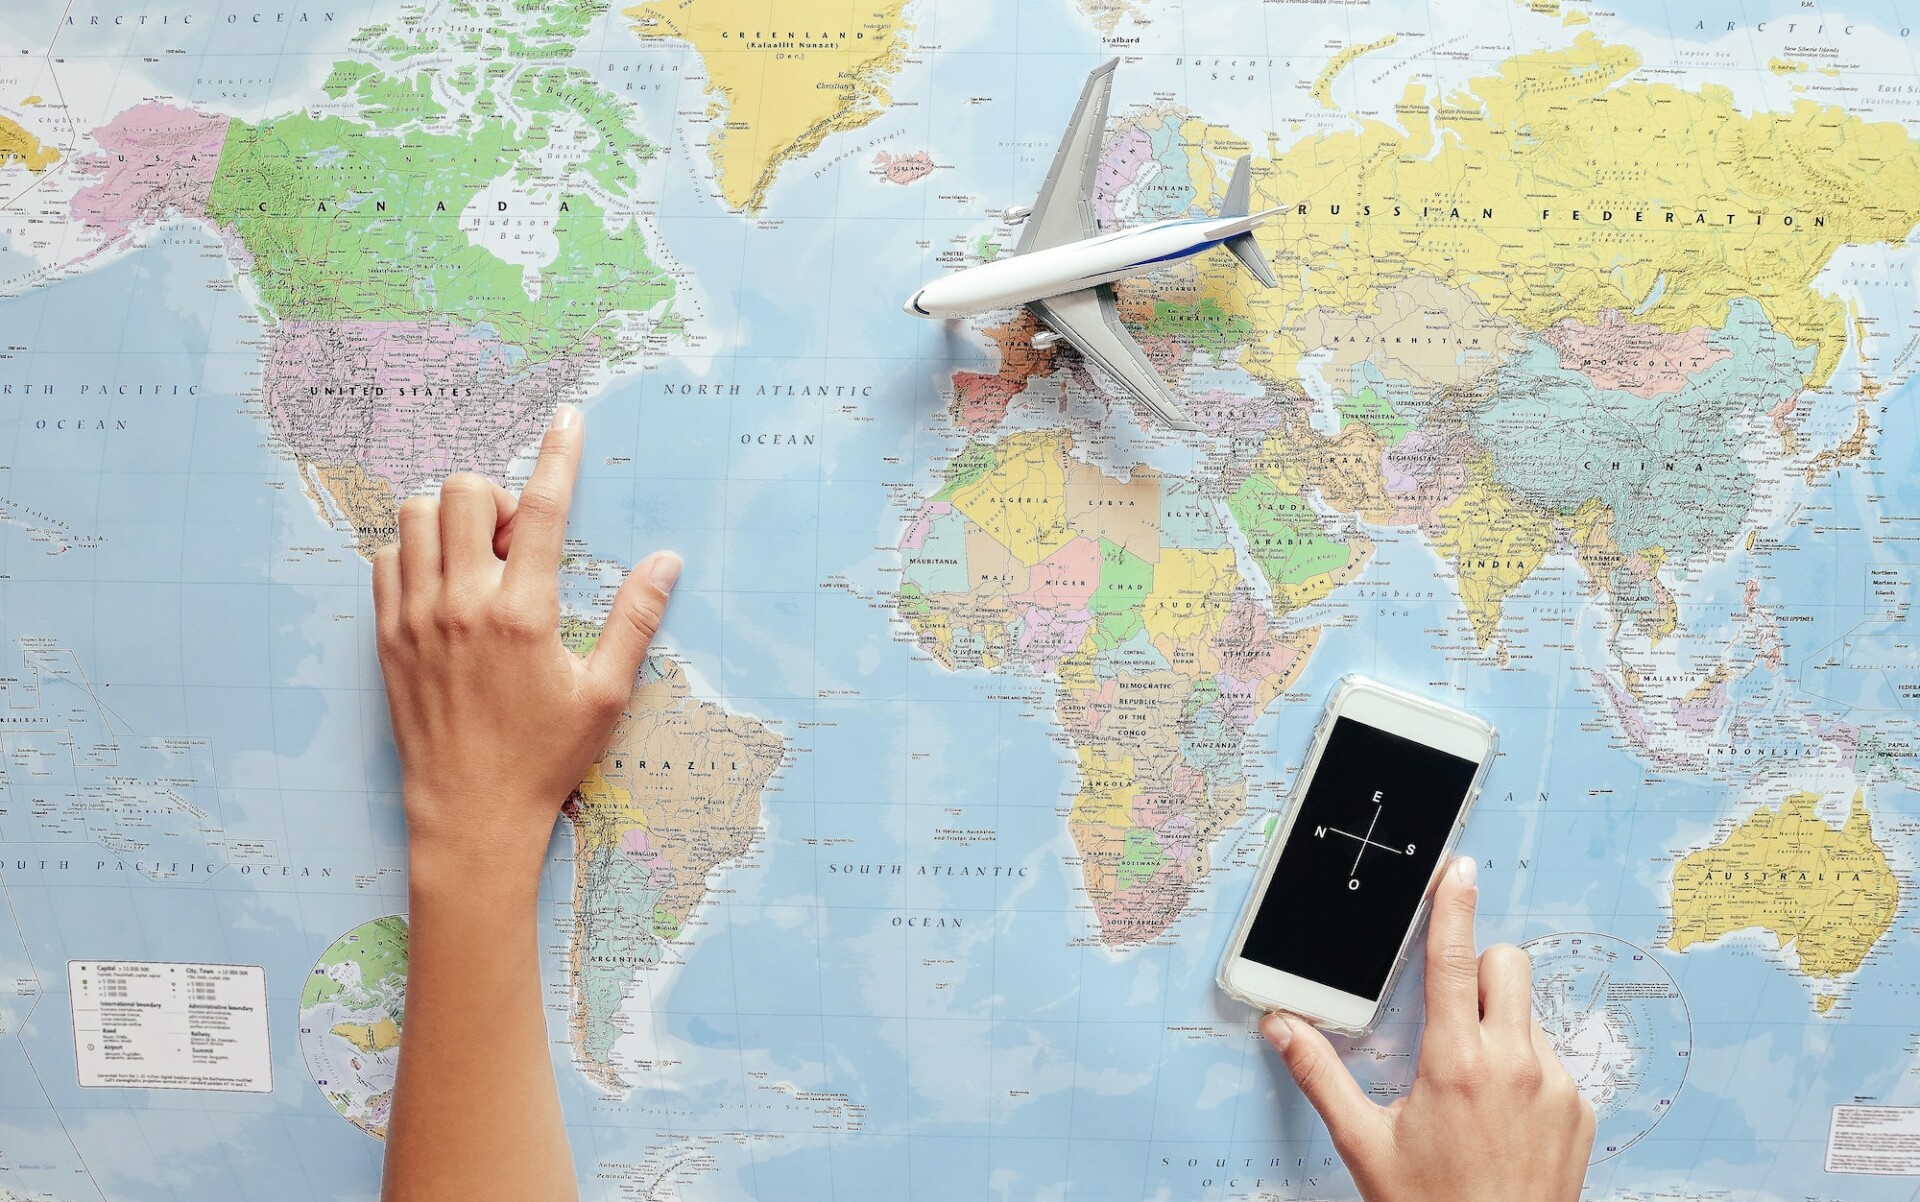 Top view of young tourist woman pointing her next travel destination using world map and phone